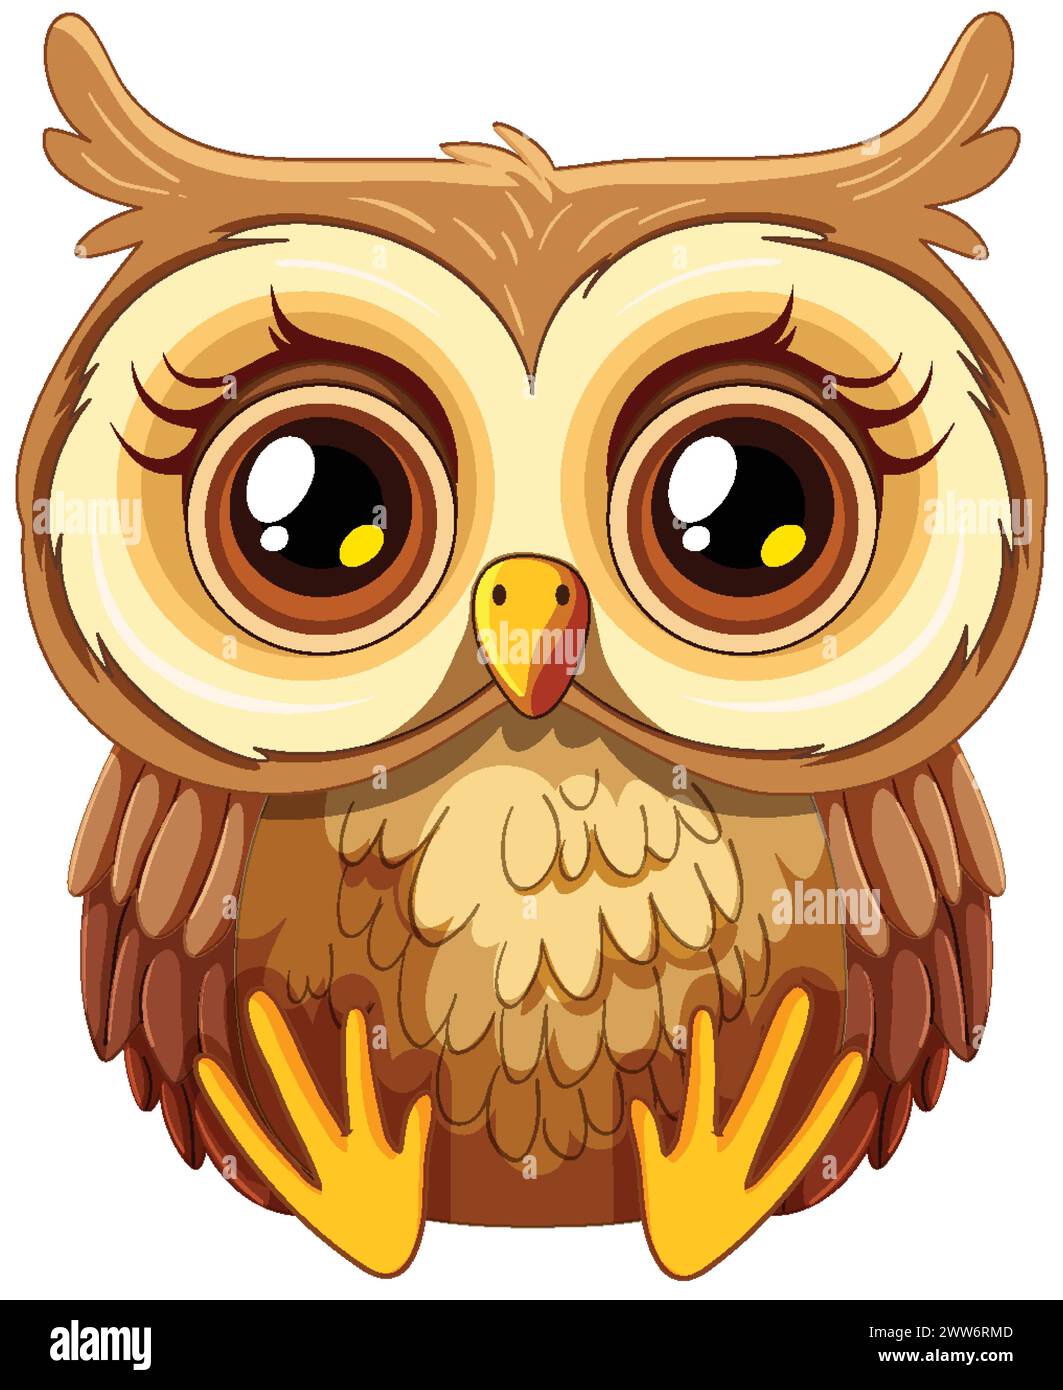 Adorable, wide-eyed owl with vibrant colors Stock Vector